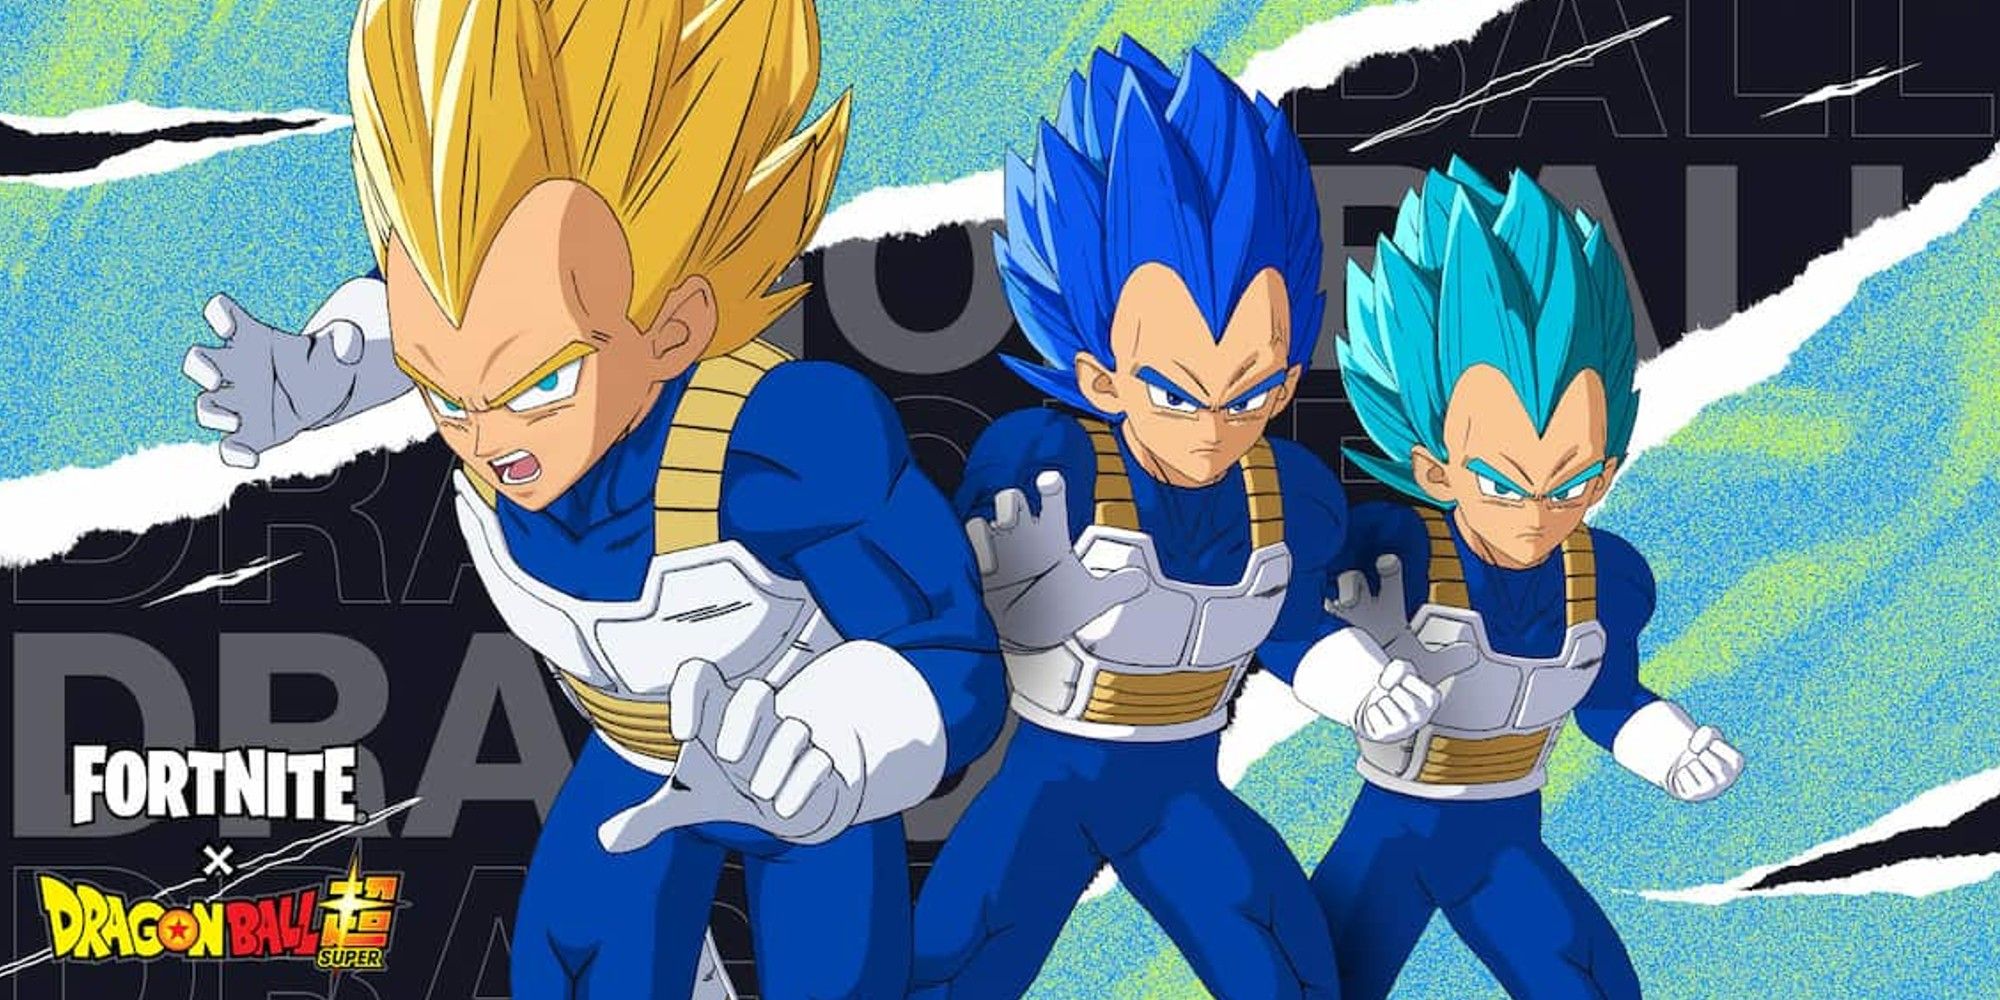 vegeta's different forms in fortnite